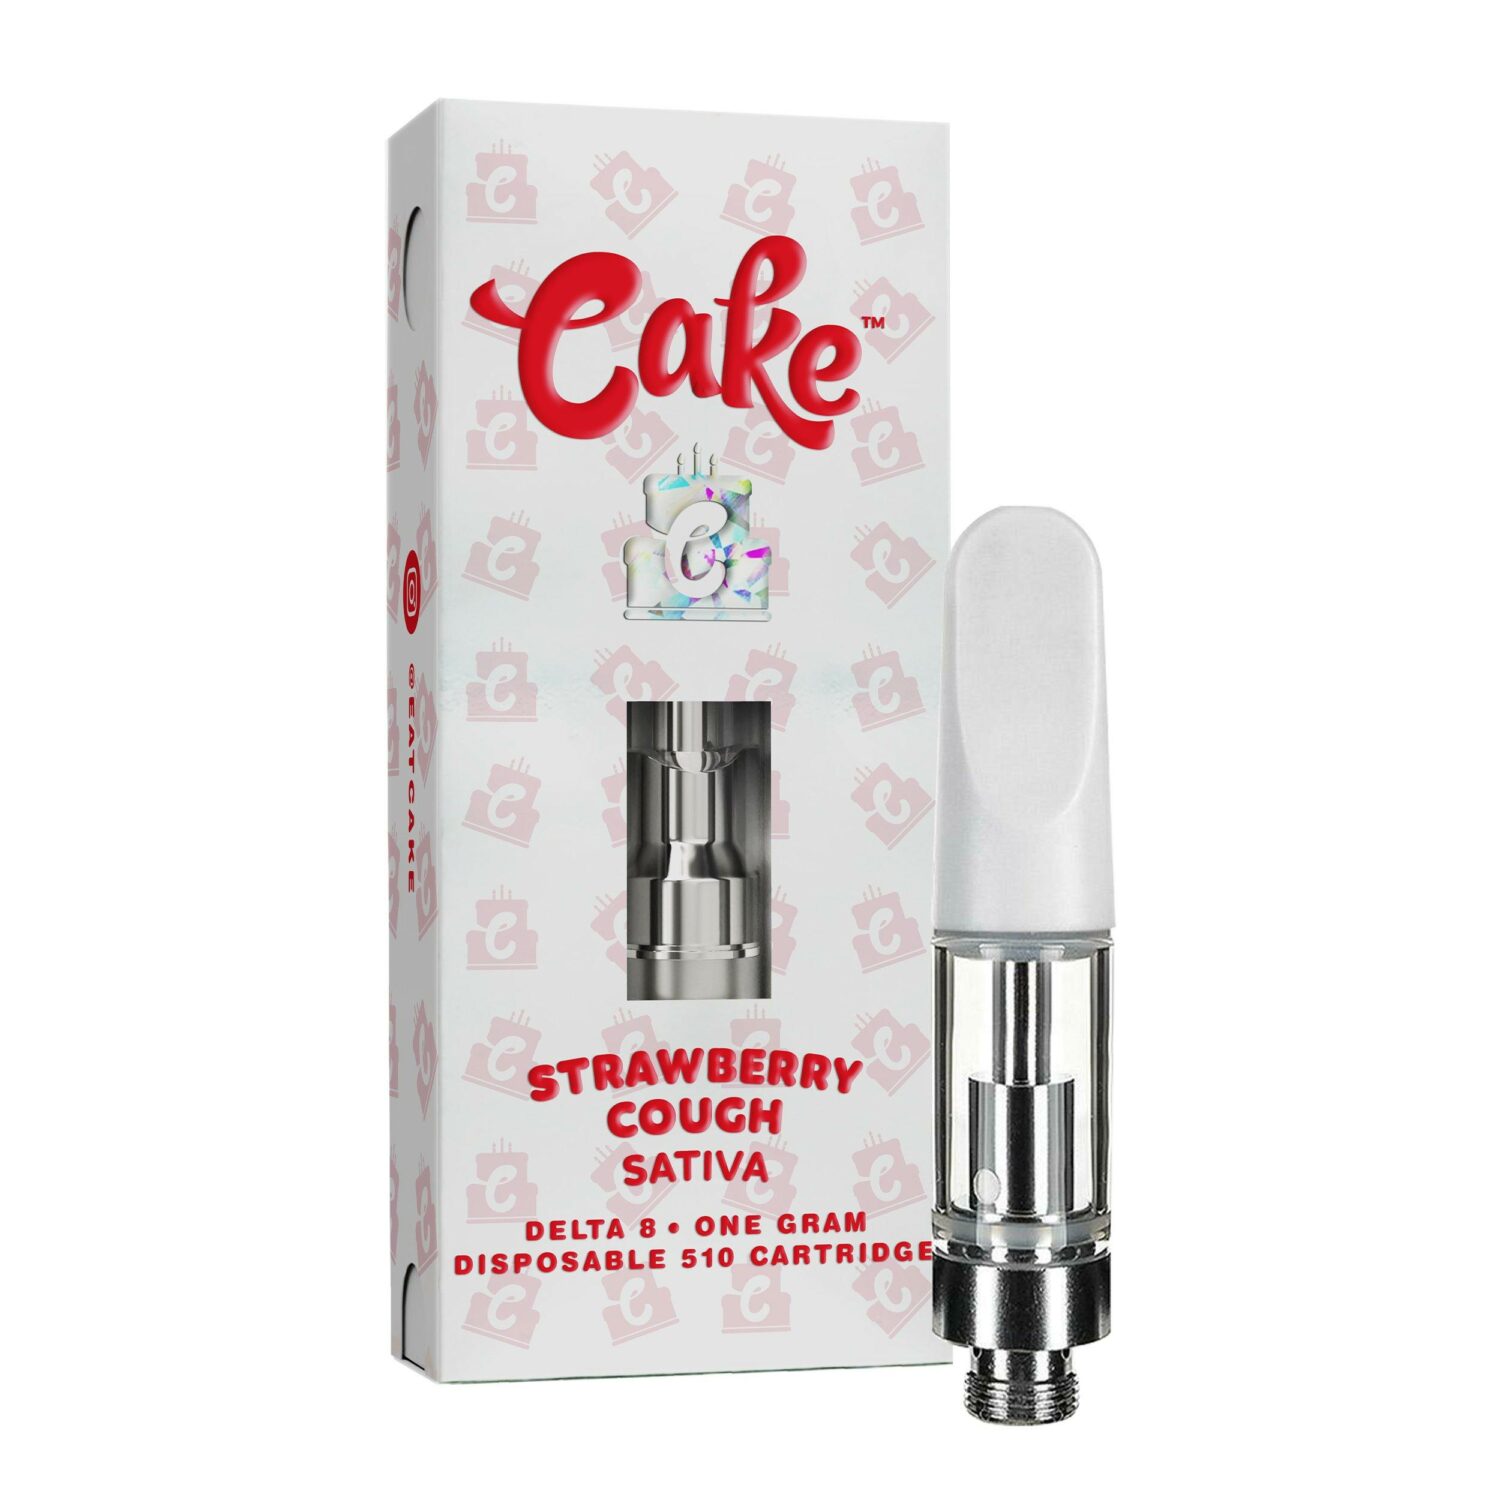 d8gas-cake-delta-8-cartridges-strawberry-cough-scaled-1.jpg